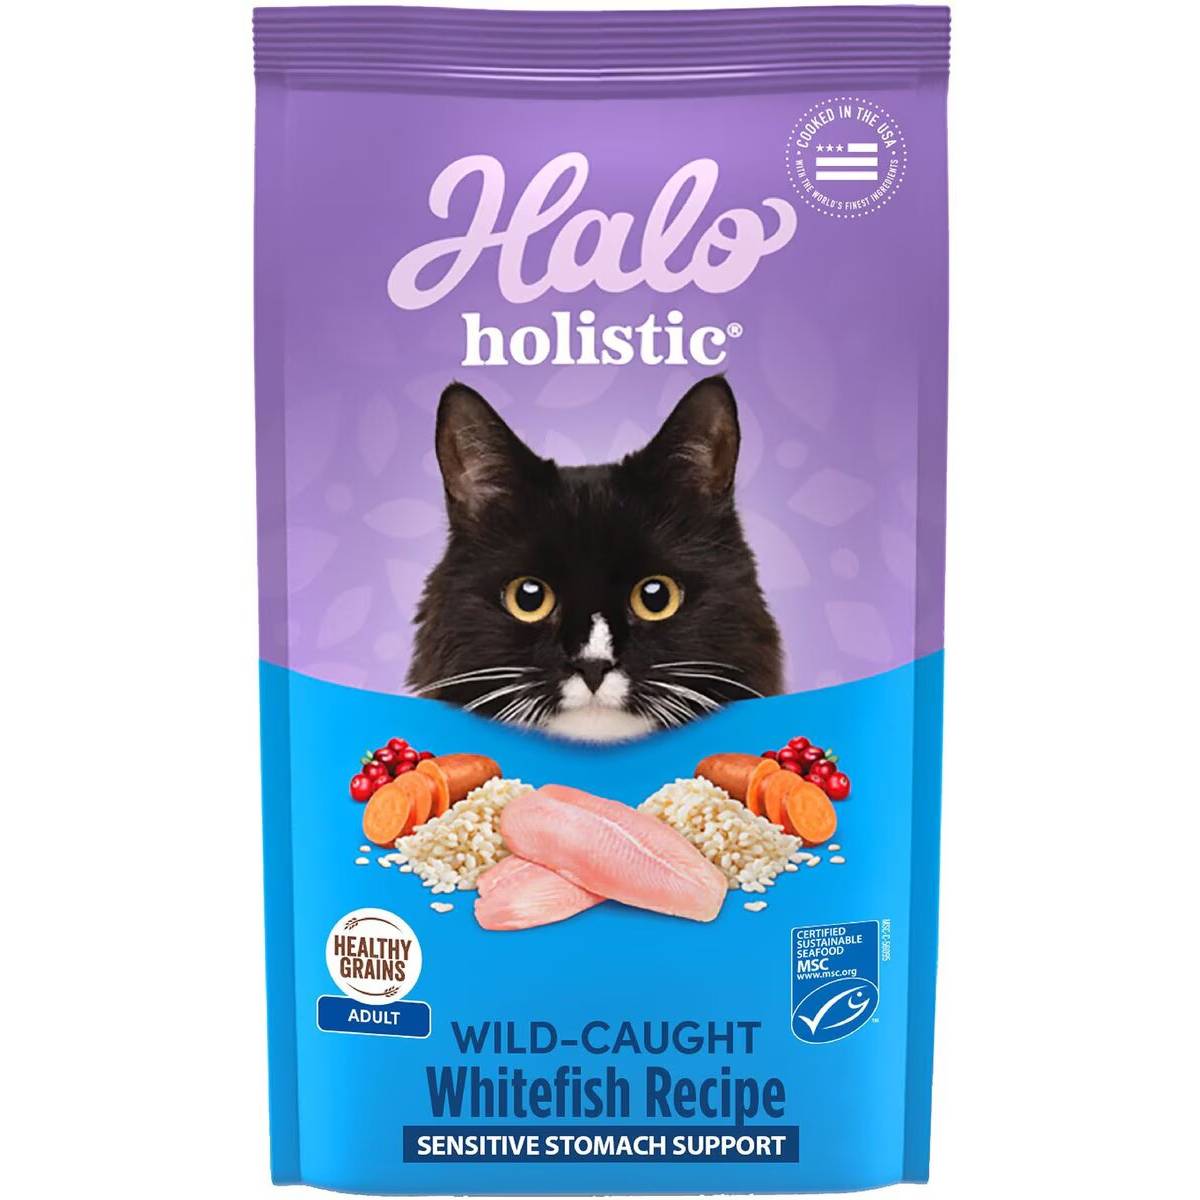 Halo Holistic Wild-Caught Whitefish Recipe Sensitive Stomach Support Adult Dry Cat Food